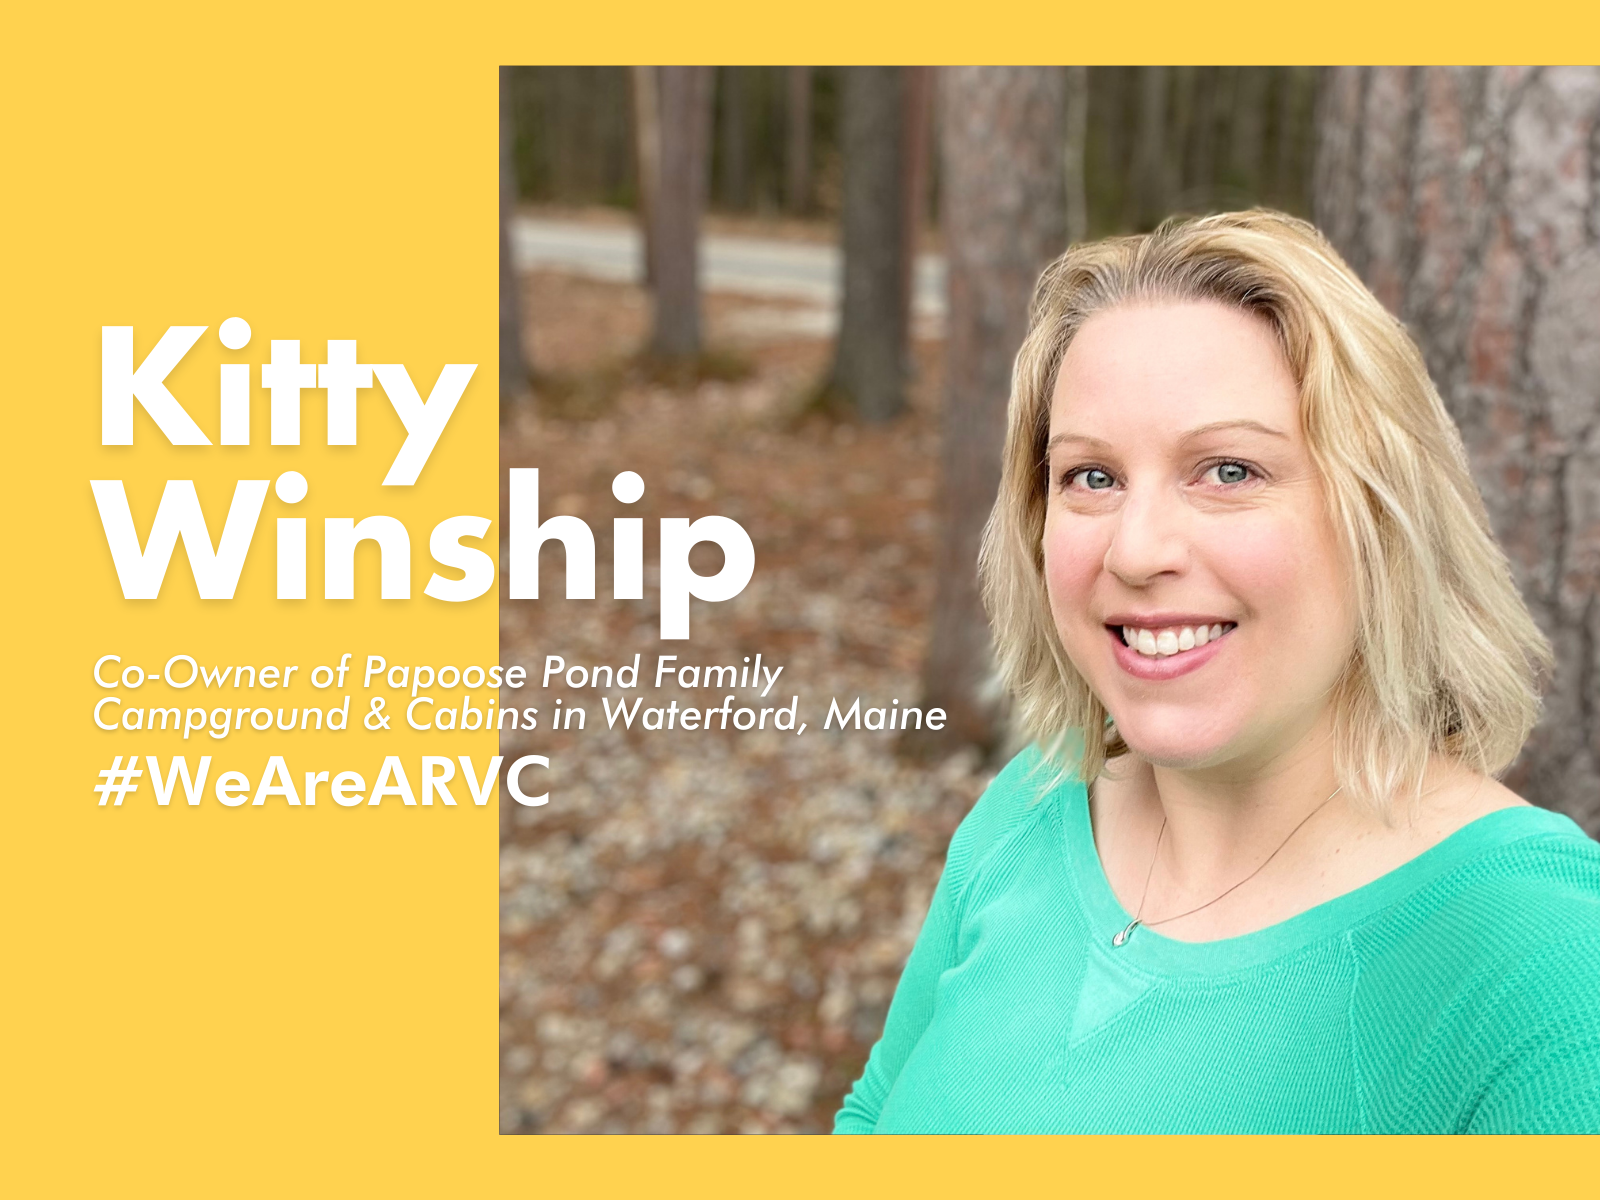 Kitty Winship Co-Owner of Papoose Pond Family Campground & Cabins in Waterford, Maine